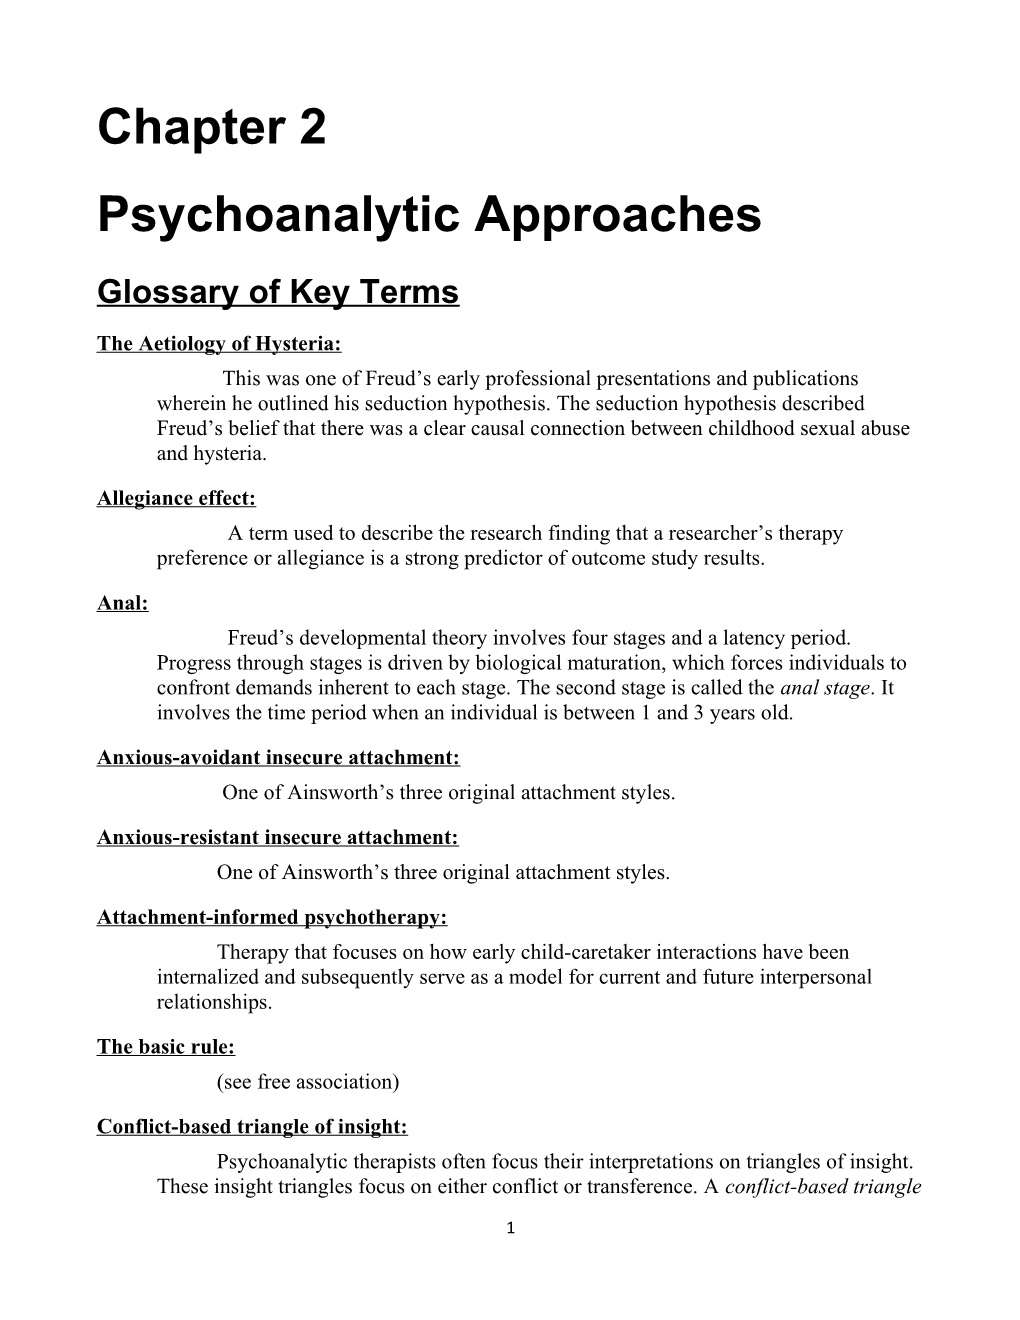 Definitions of Counseling and Psychotherapy